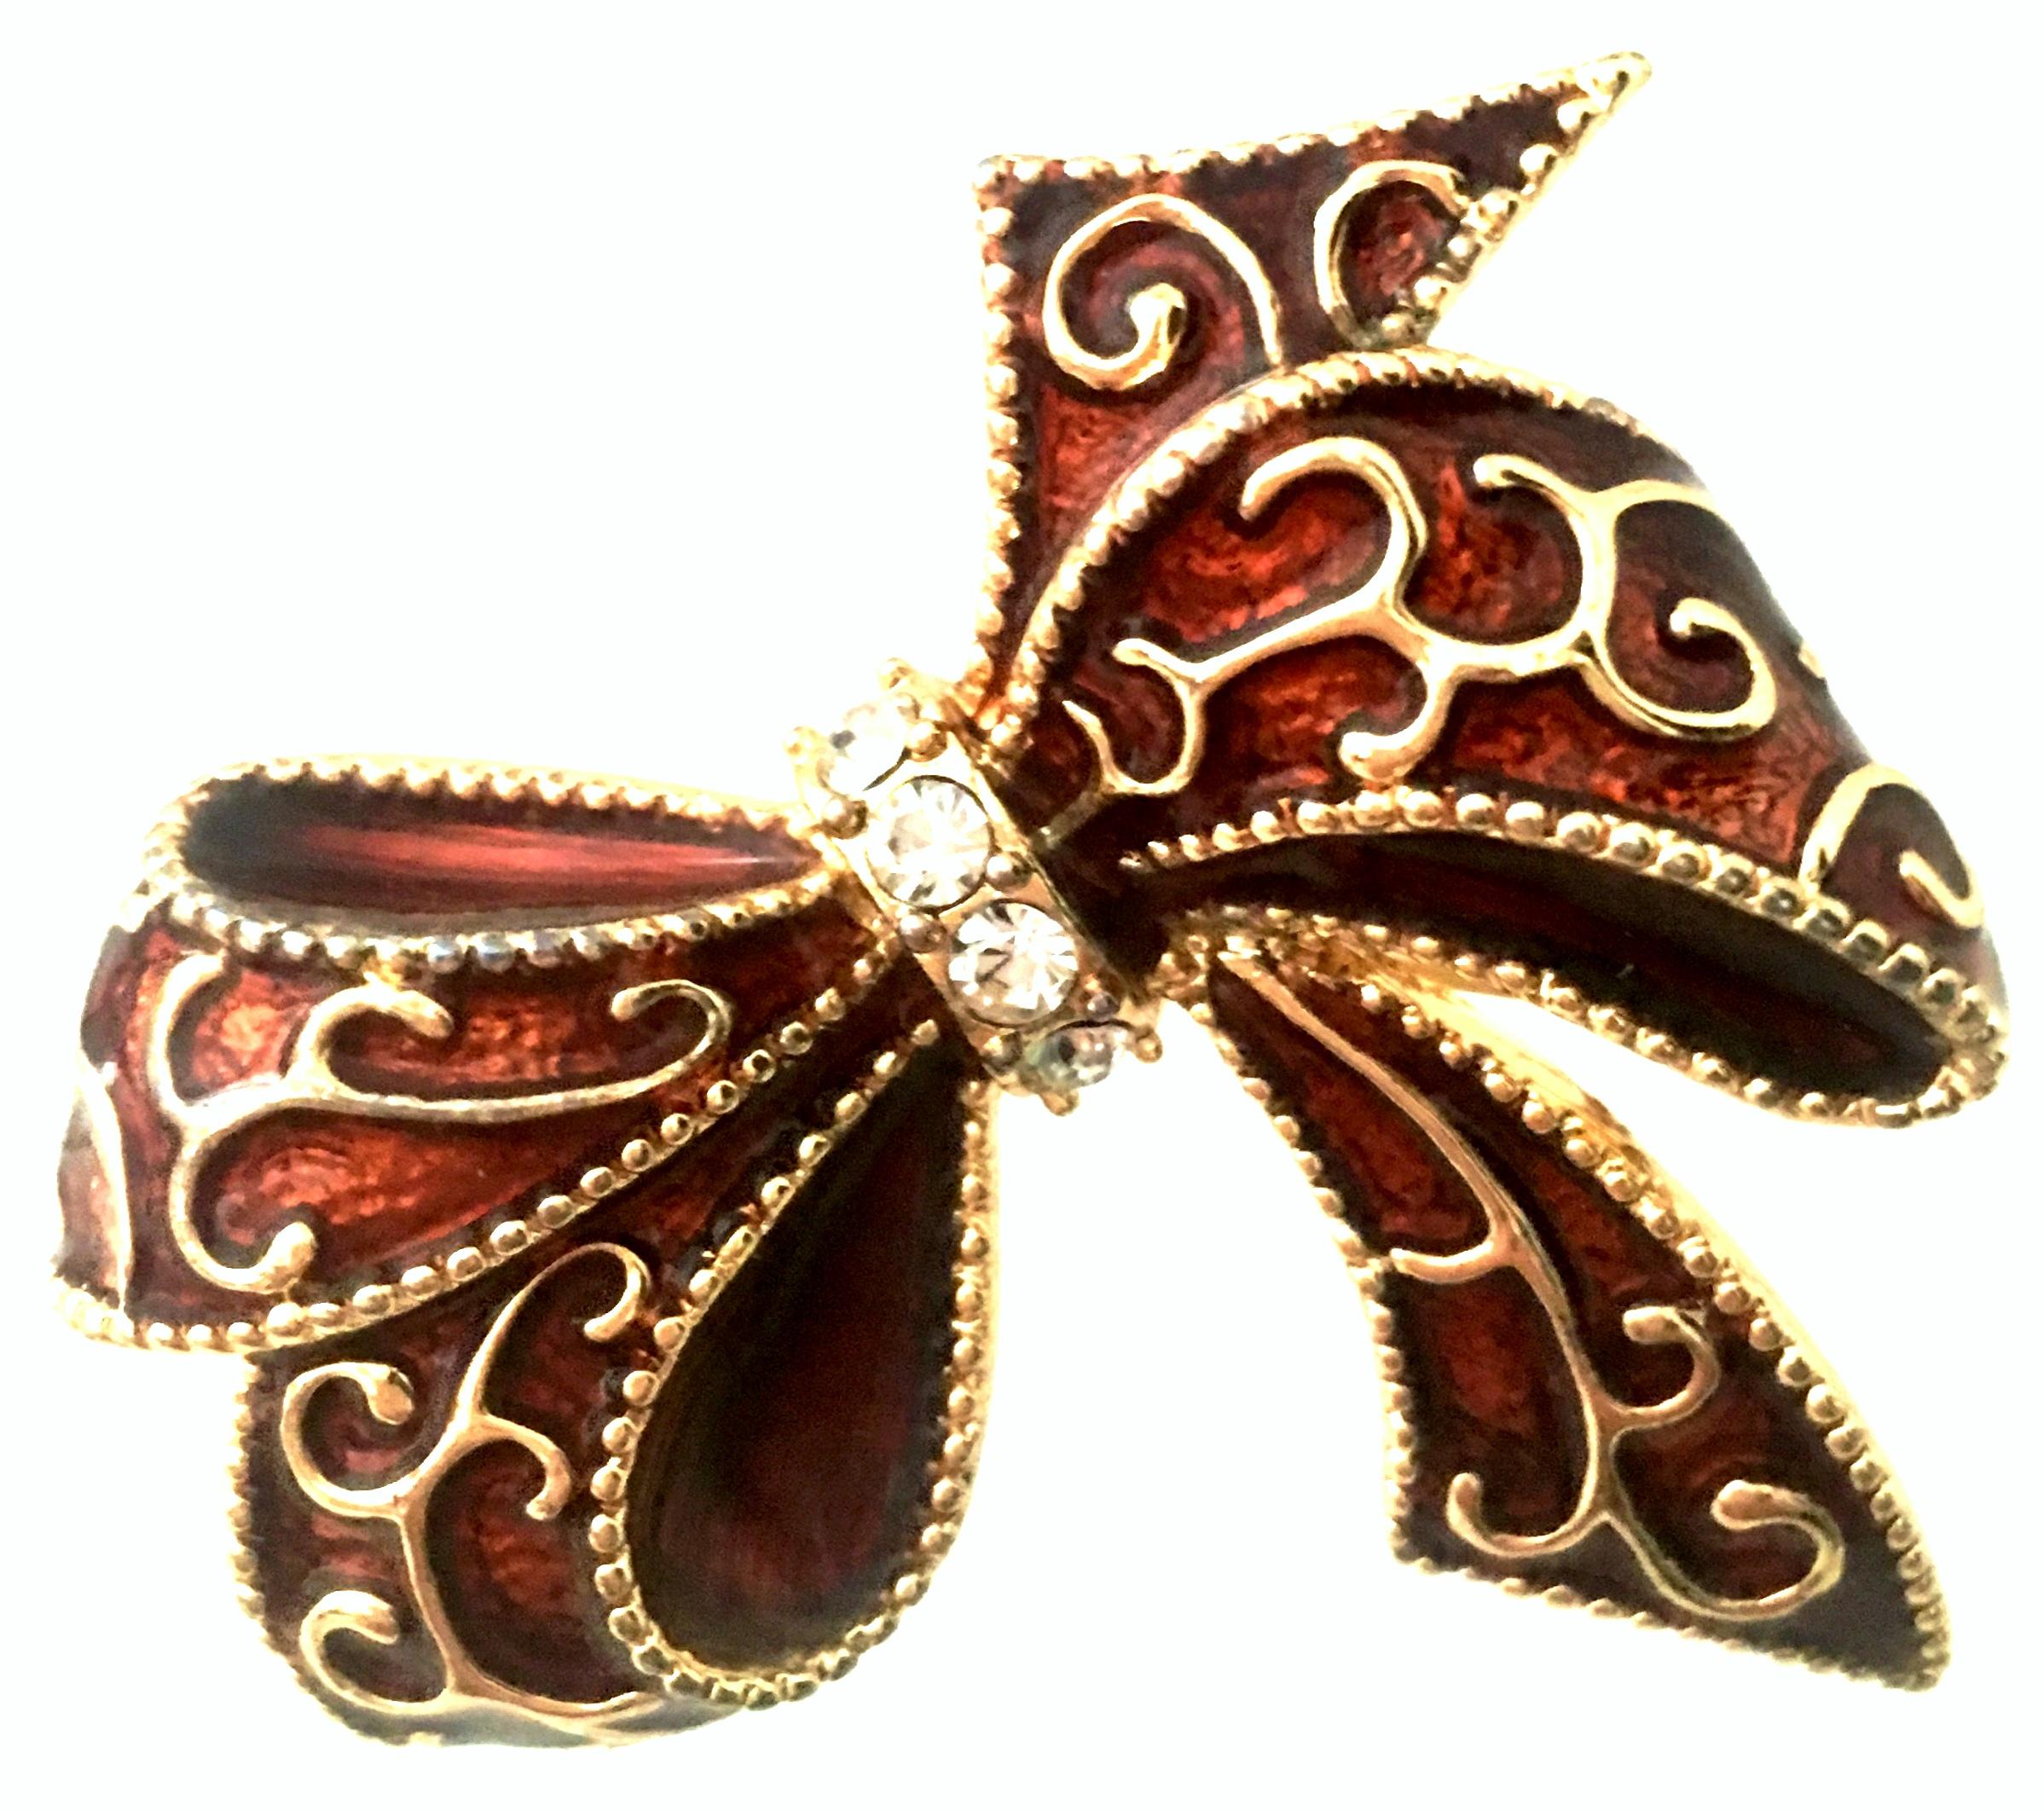 20th Century Gold Plate, Hand Painted Enamel & Austrian Crystal Dimensional Holiday Bow Brooch By, Monet. This finely crafted Monet piece features a abstract dimensional gold plate and hand painted brick red enamel base with applied gold plate